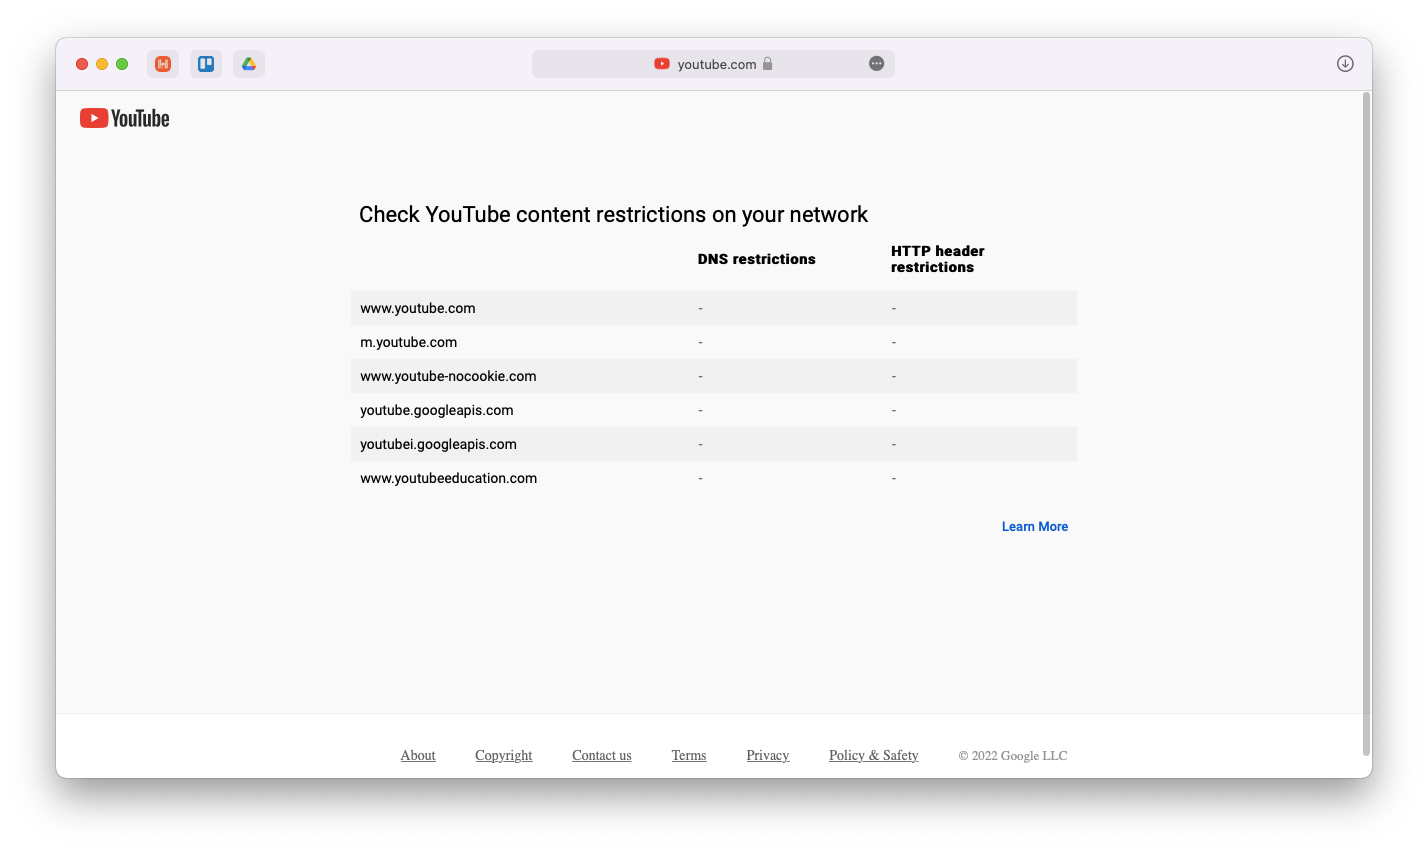 Check YouTube content restrictions on your network